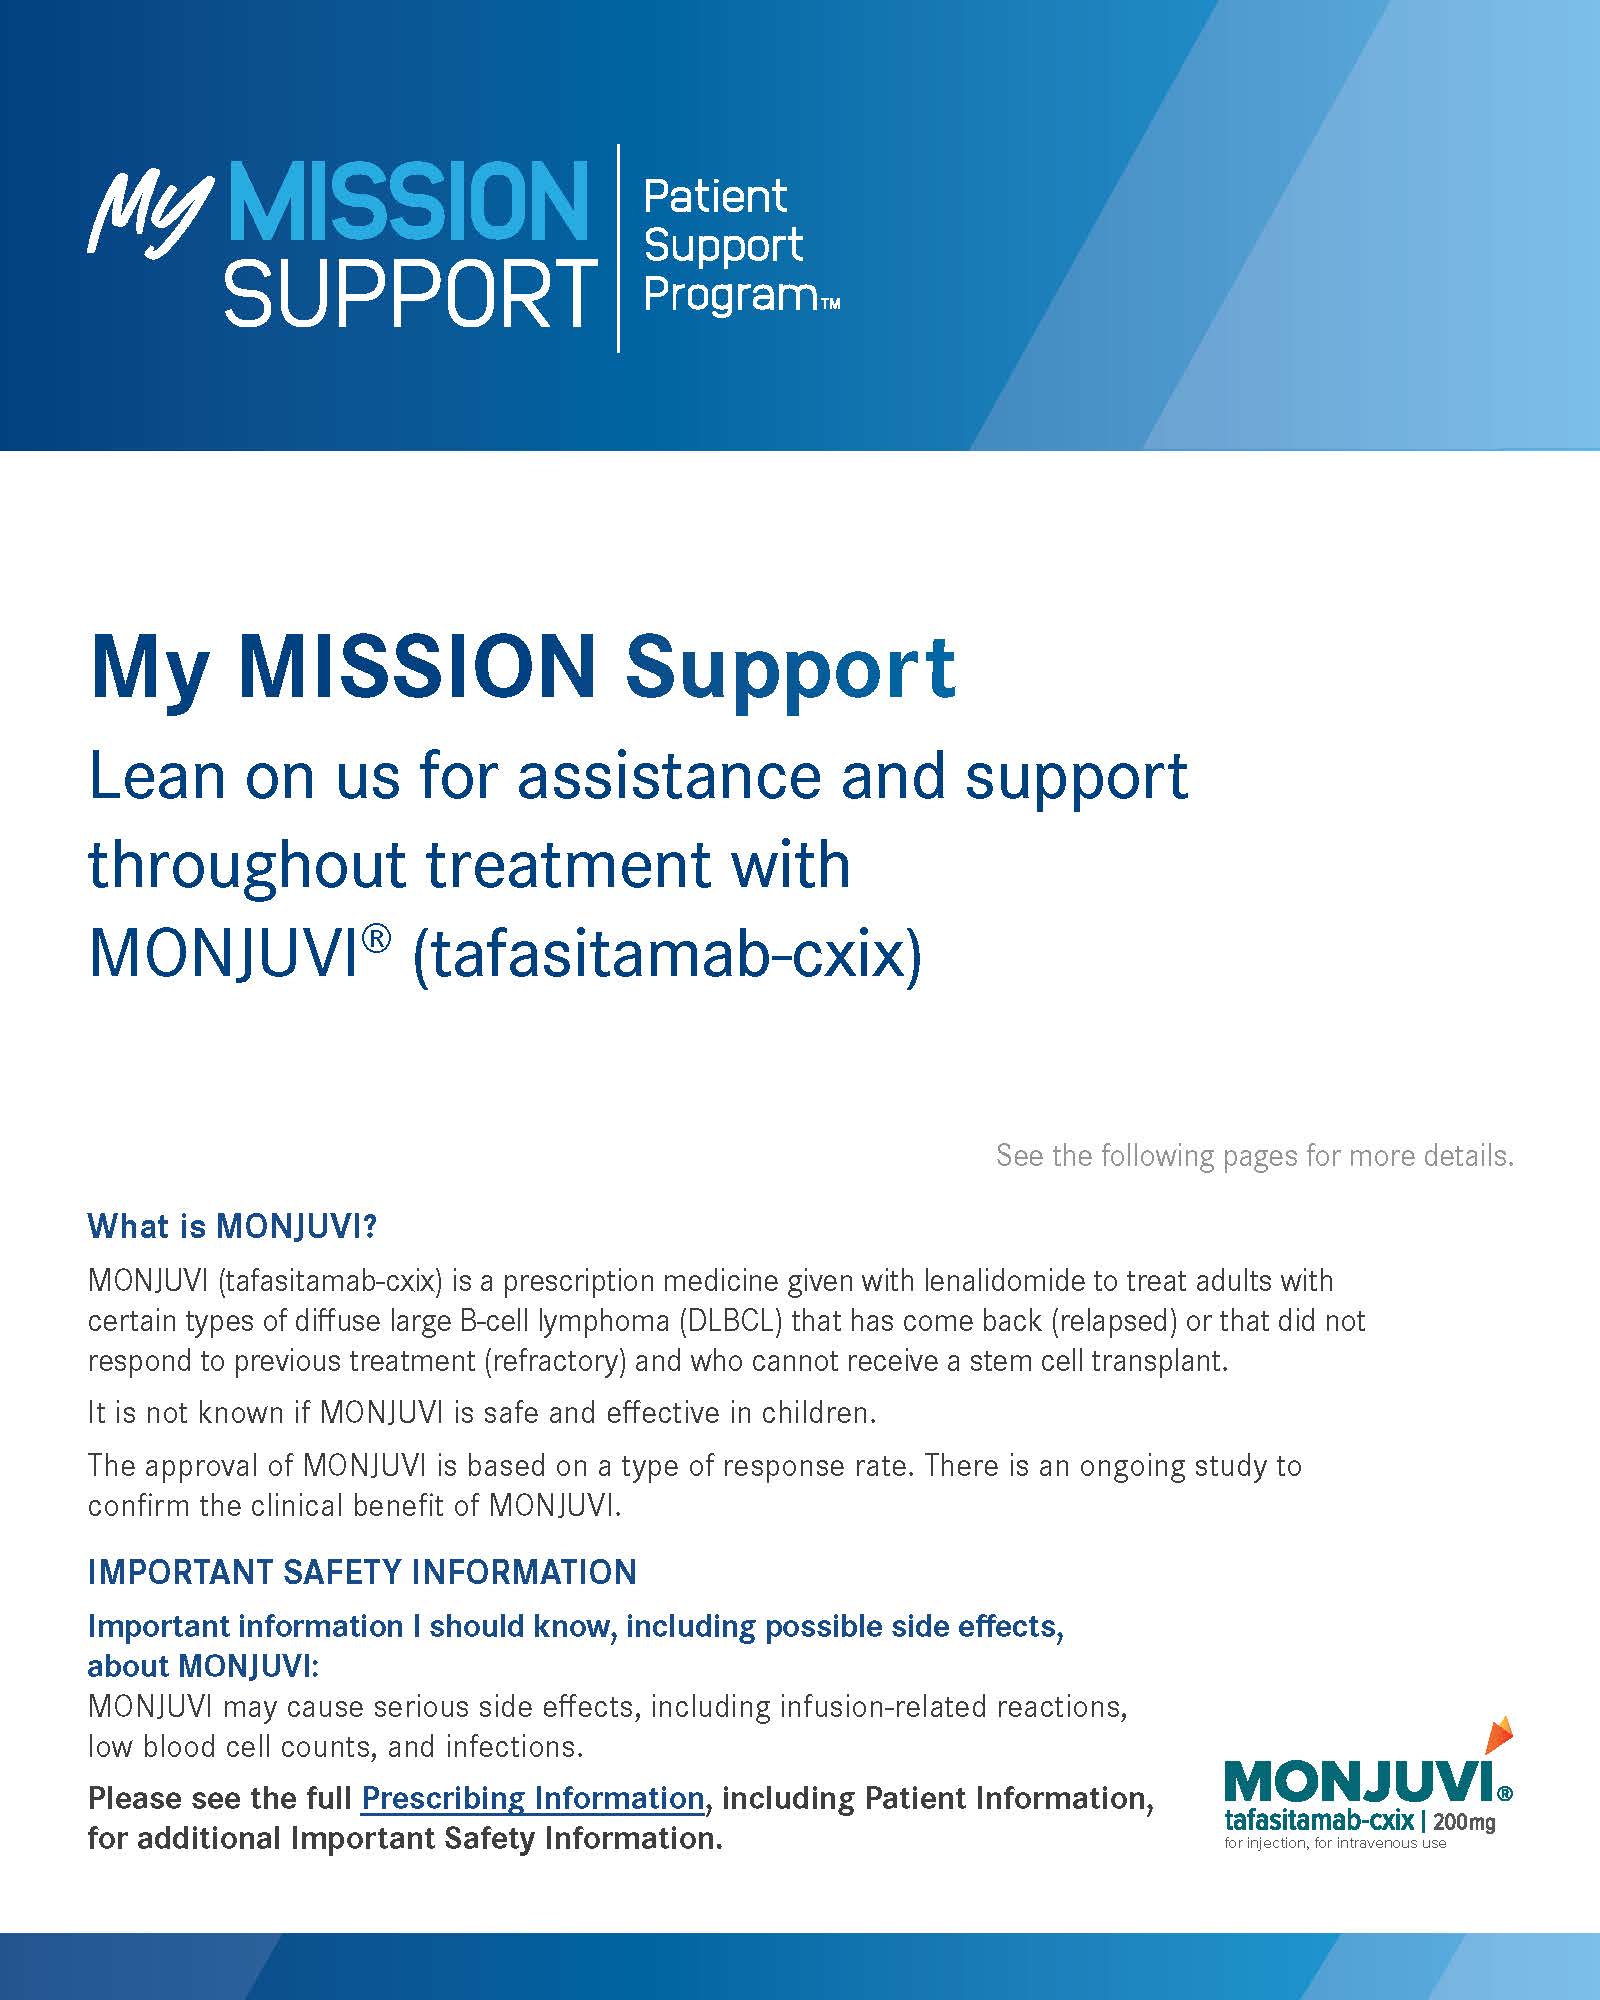 Download My MISSION support brochure